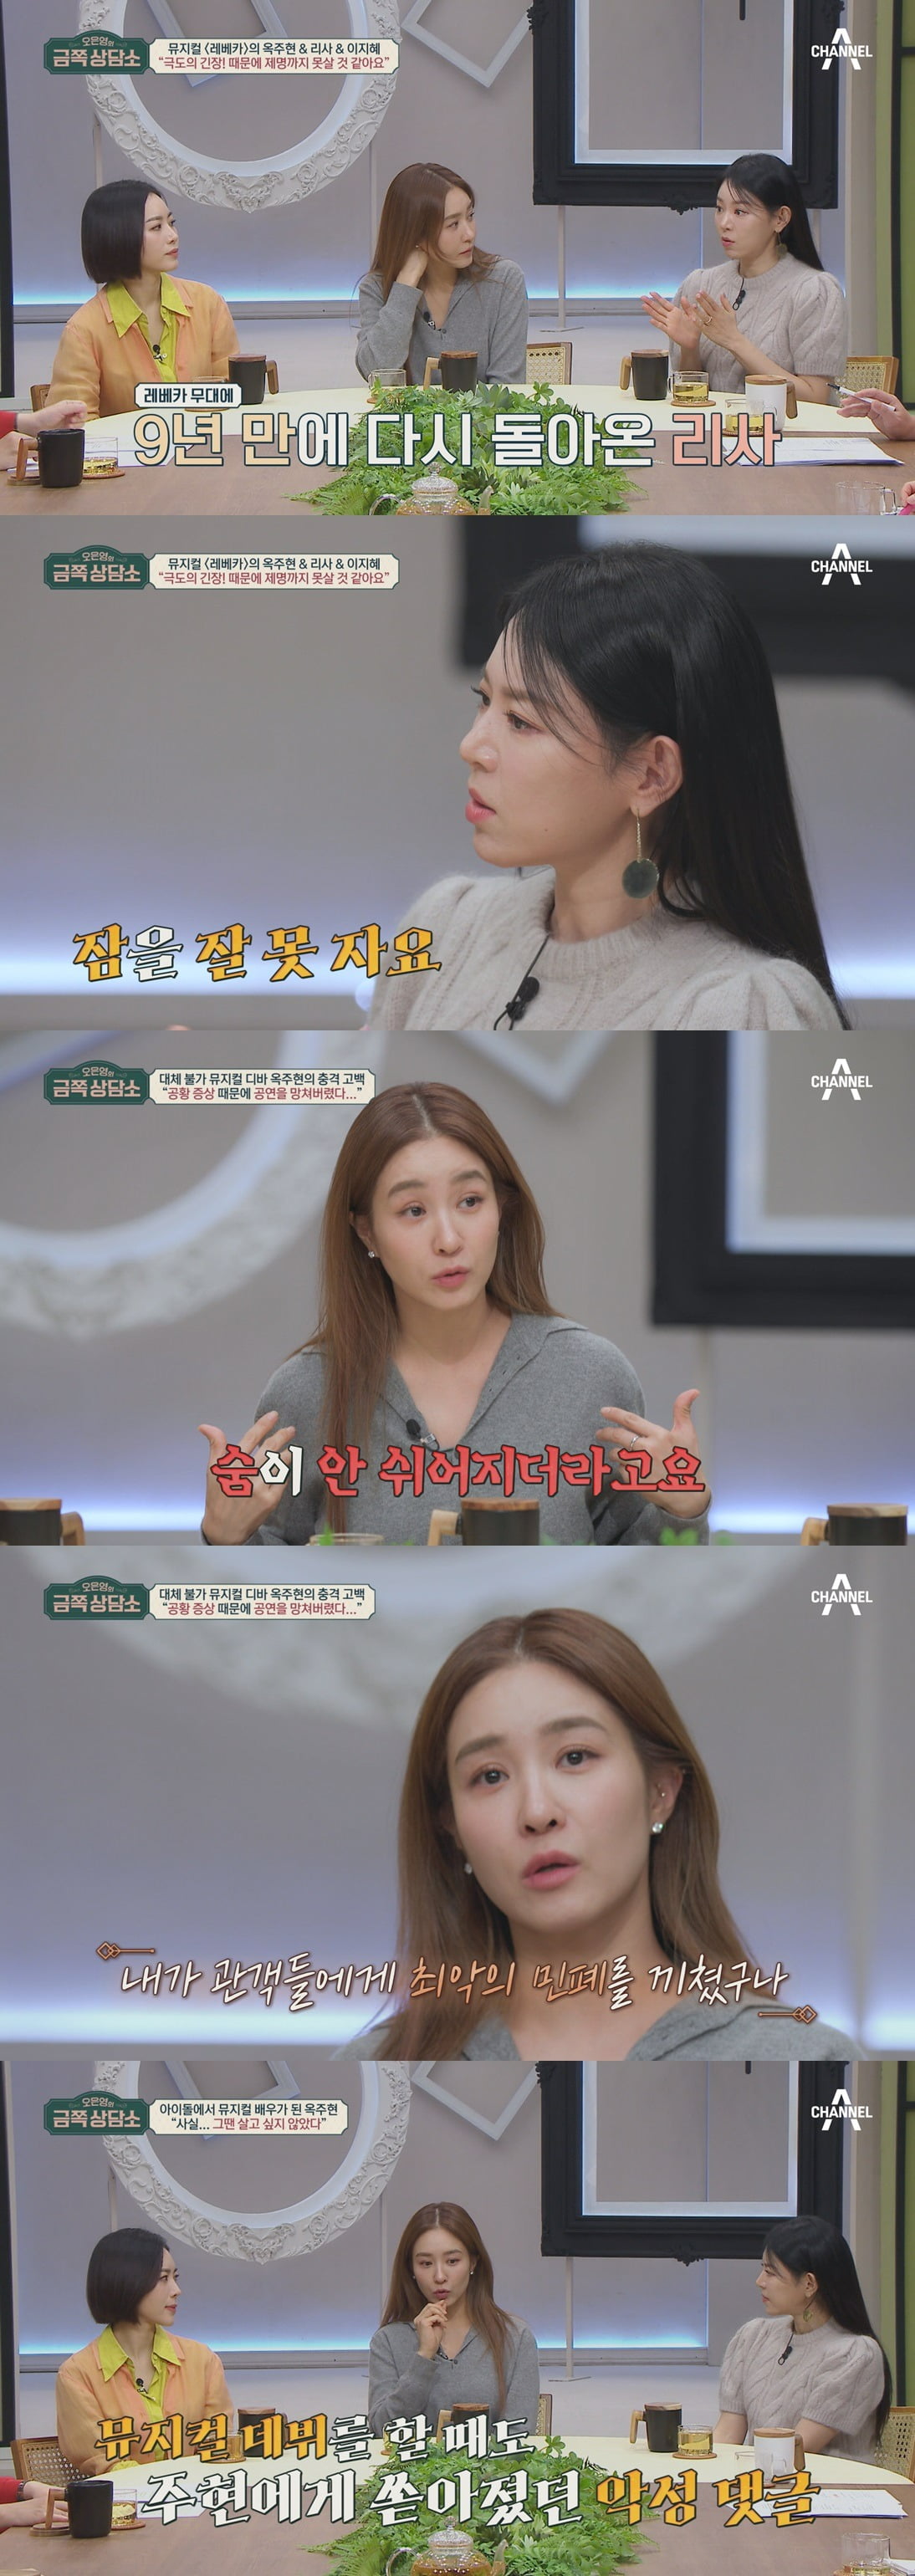 Ok Joo-hyun, "I'm thinking about dying from so many malicious comments and debt."